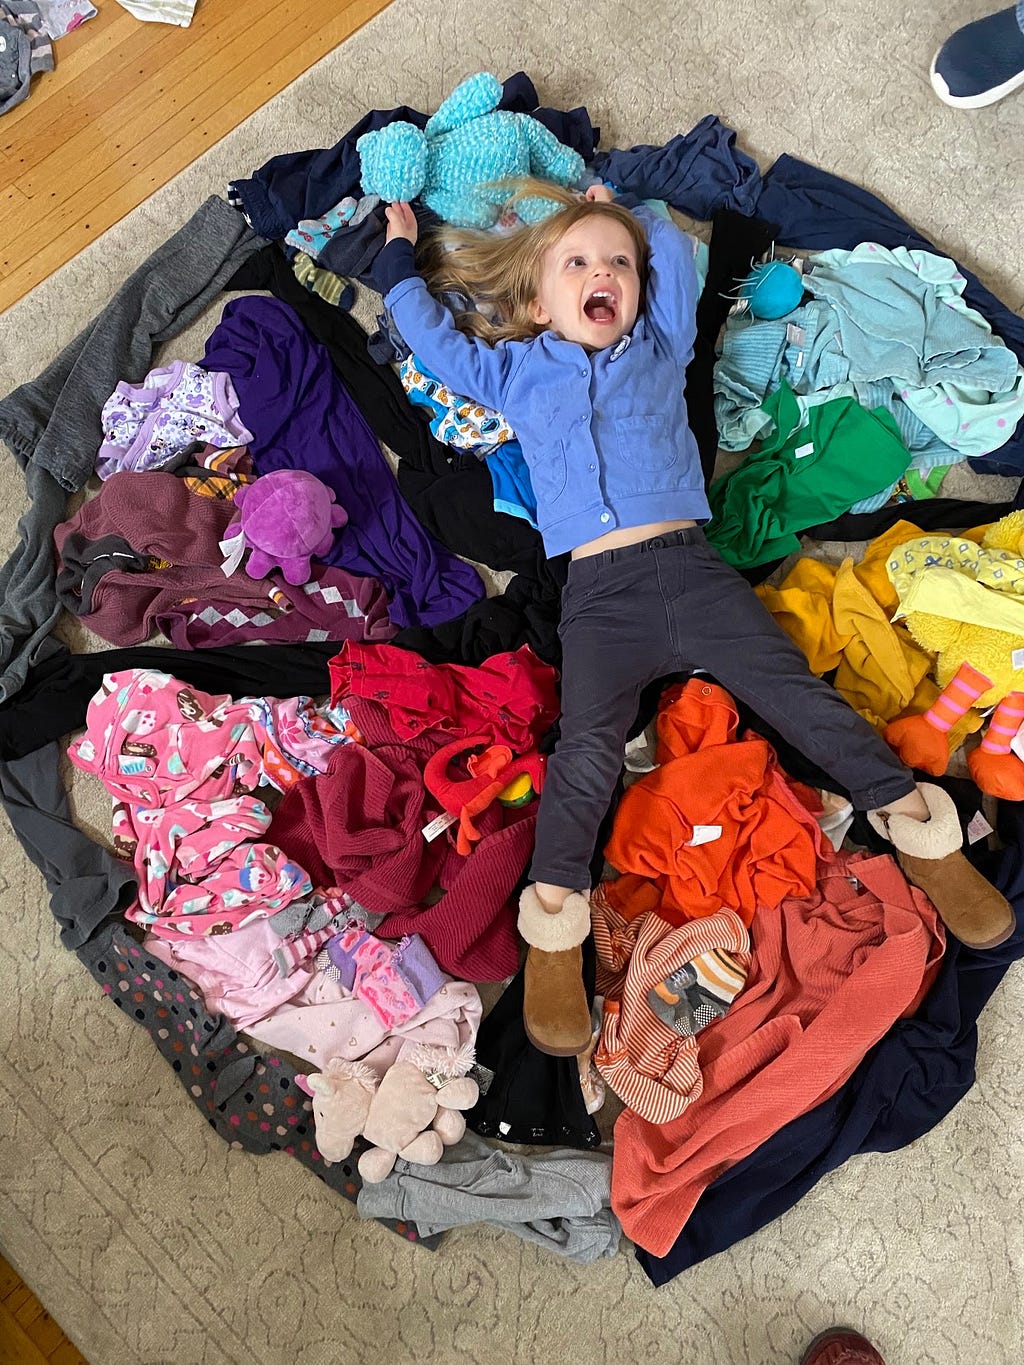 A child lies in a pile of laundry.